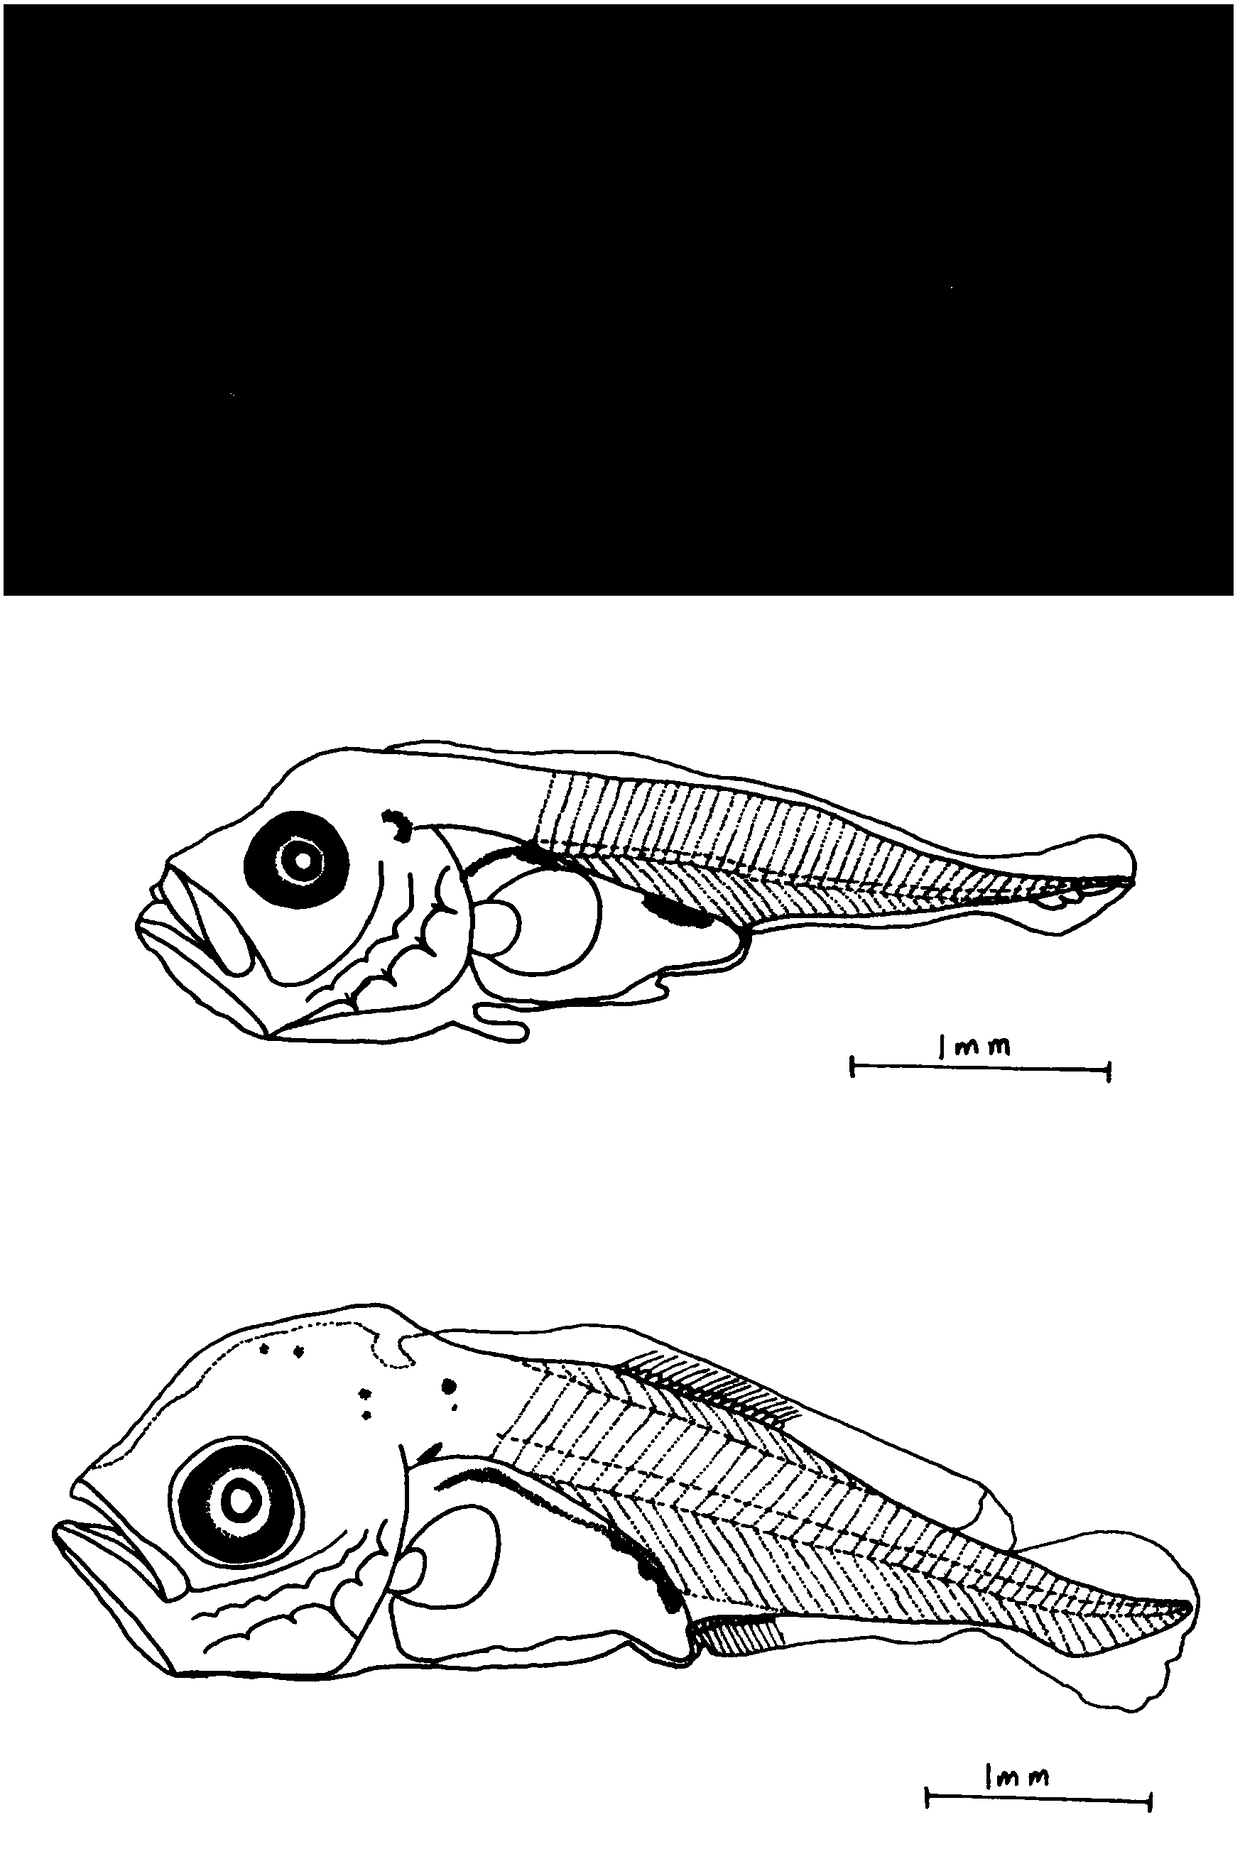 Method for drawing morphology of fish eggs and larvae